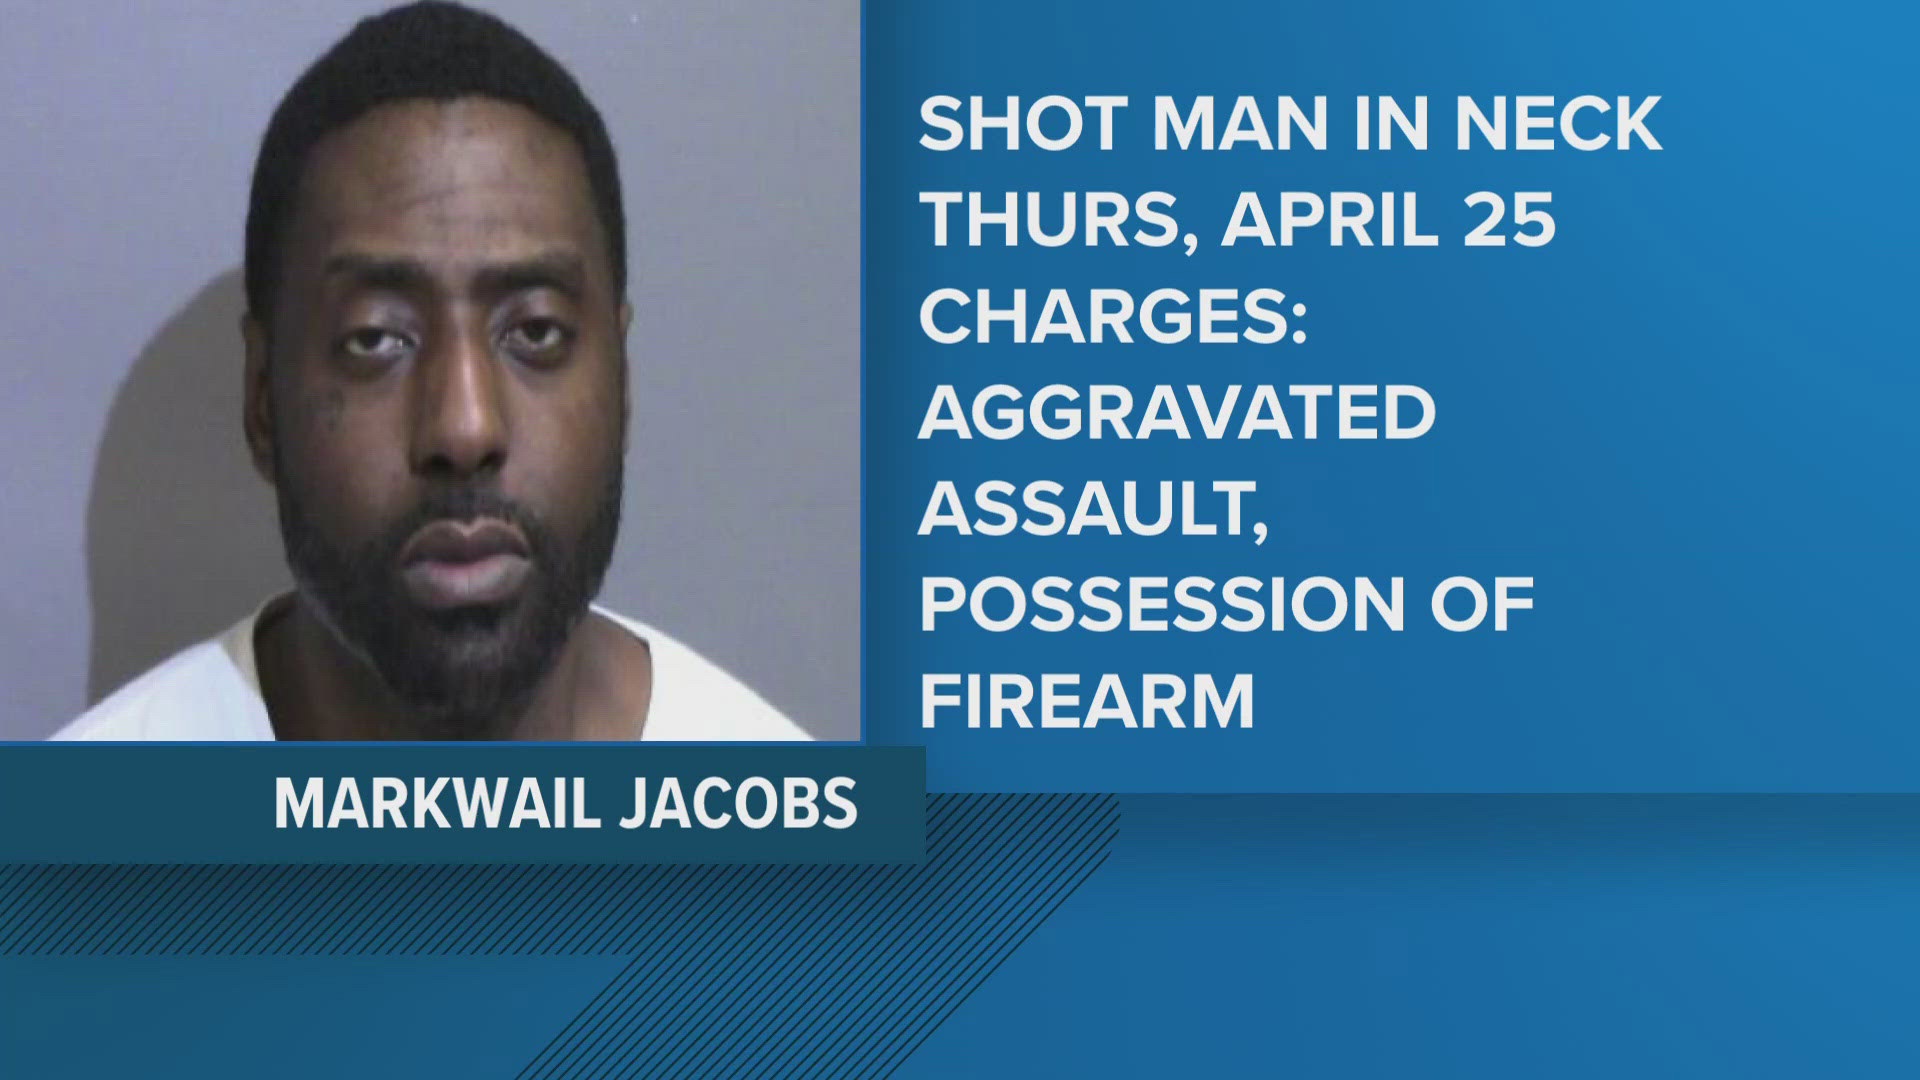 Markwail Jacobs faces charges of aggravated assault and possession of a firearm.